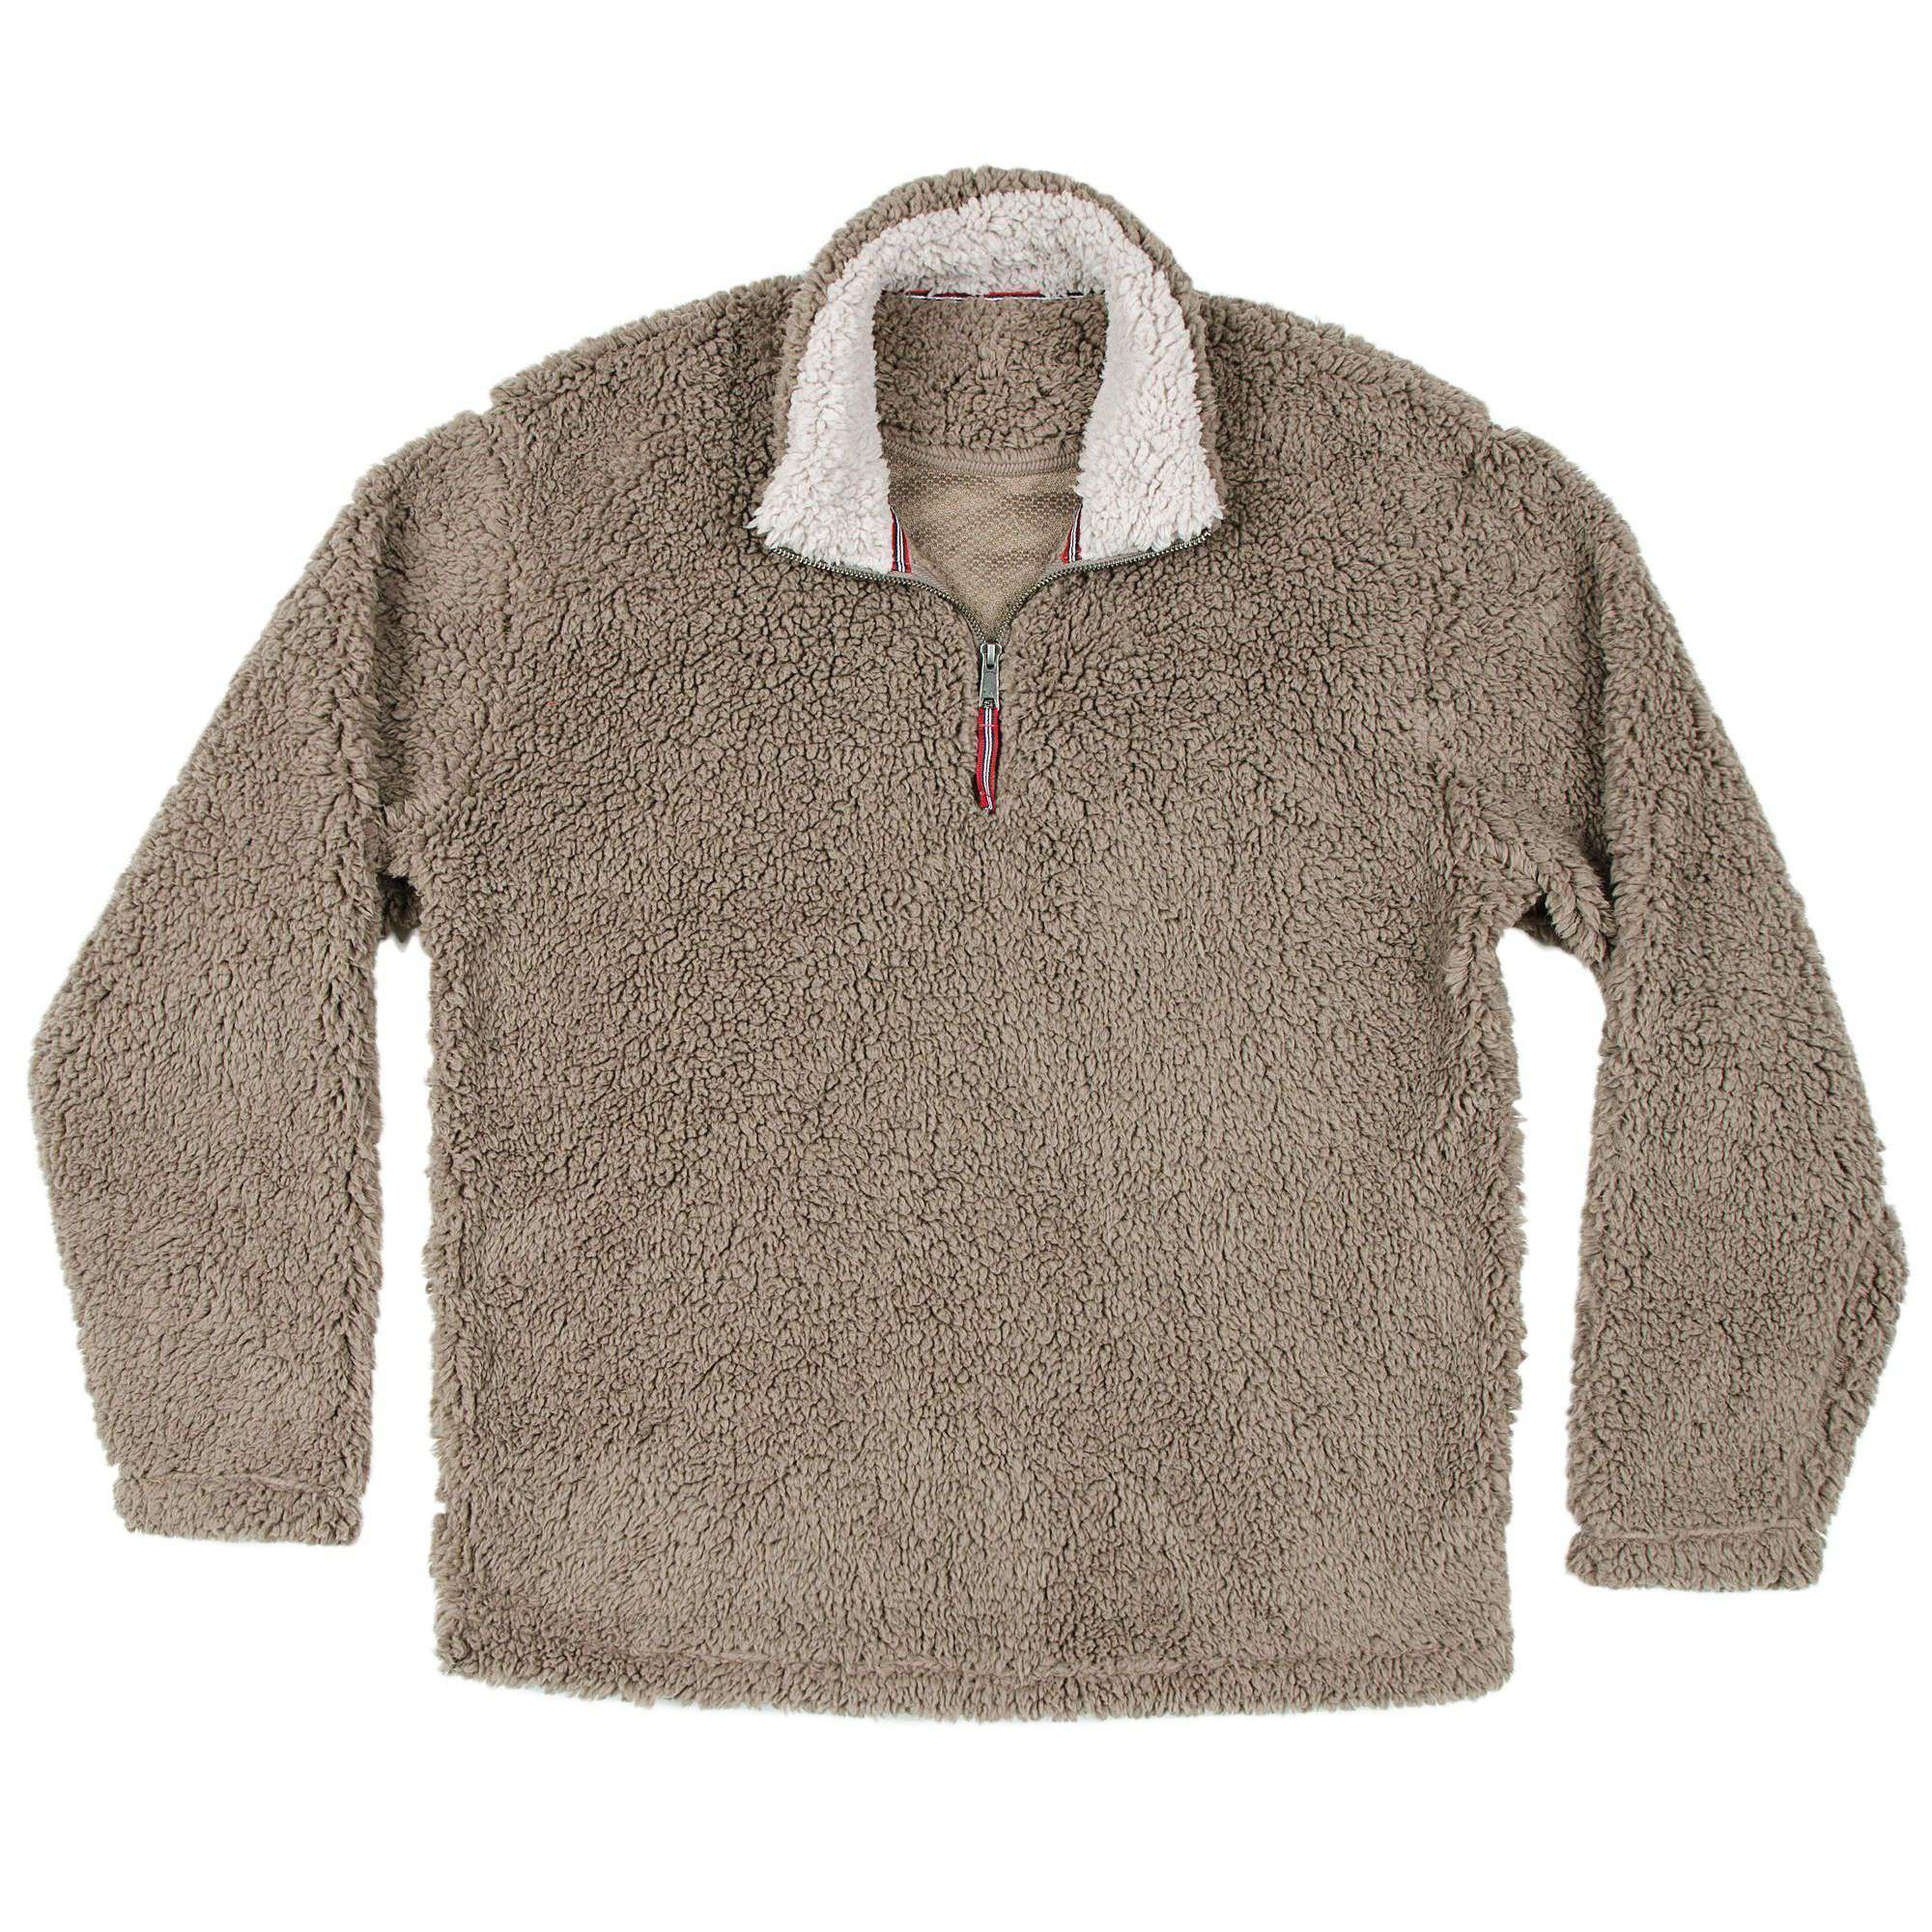 Appalachian Pile Pullover 1/4 Zip in Light Brown by Southern Marsh - Country Club Prep